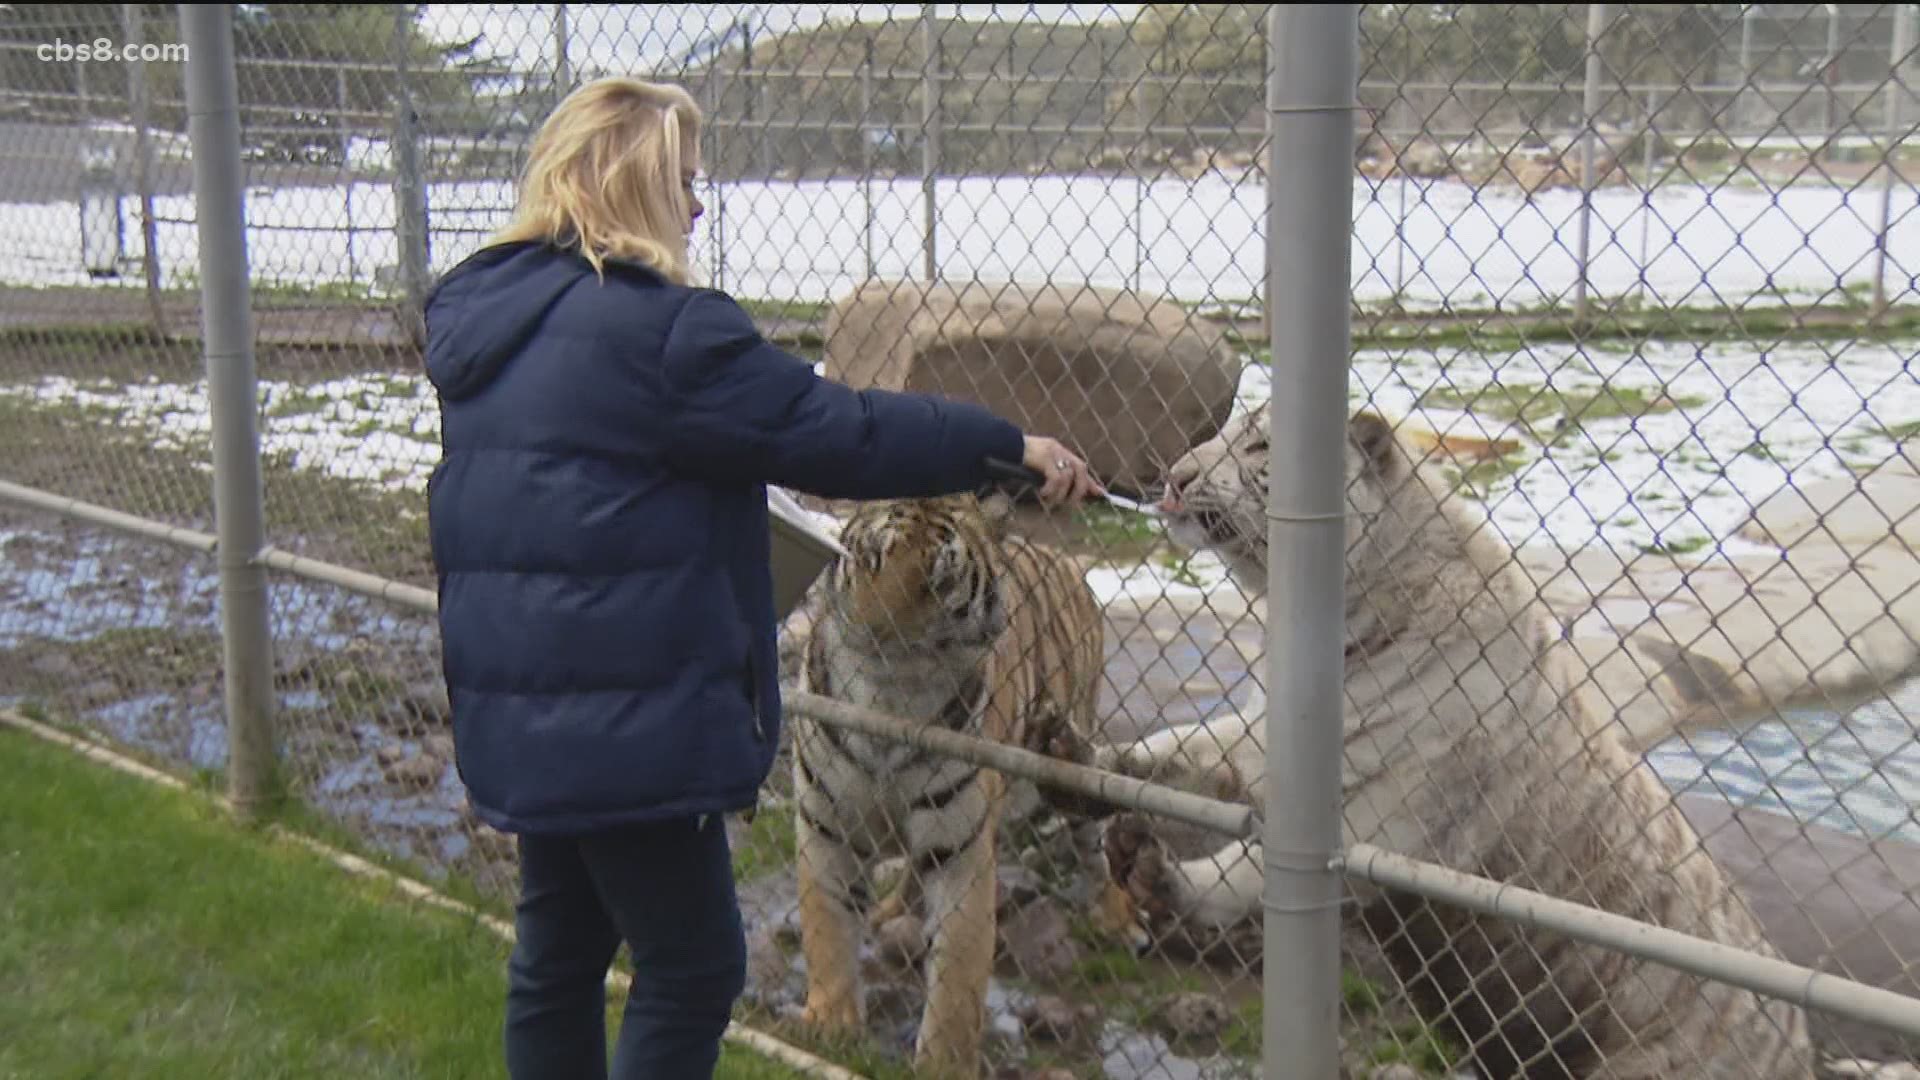 Founder of the big cat rescue, Bobbi Brink joined Morning Extra to talk about what they have been up to and how they are celebrating.